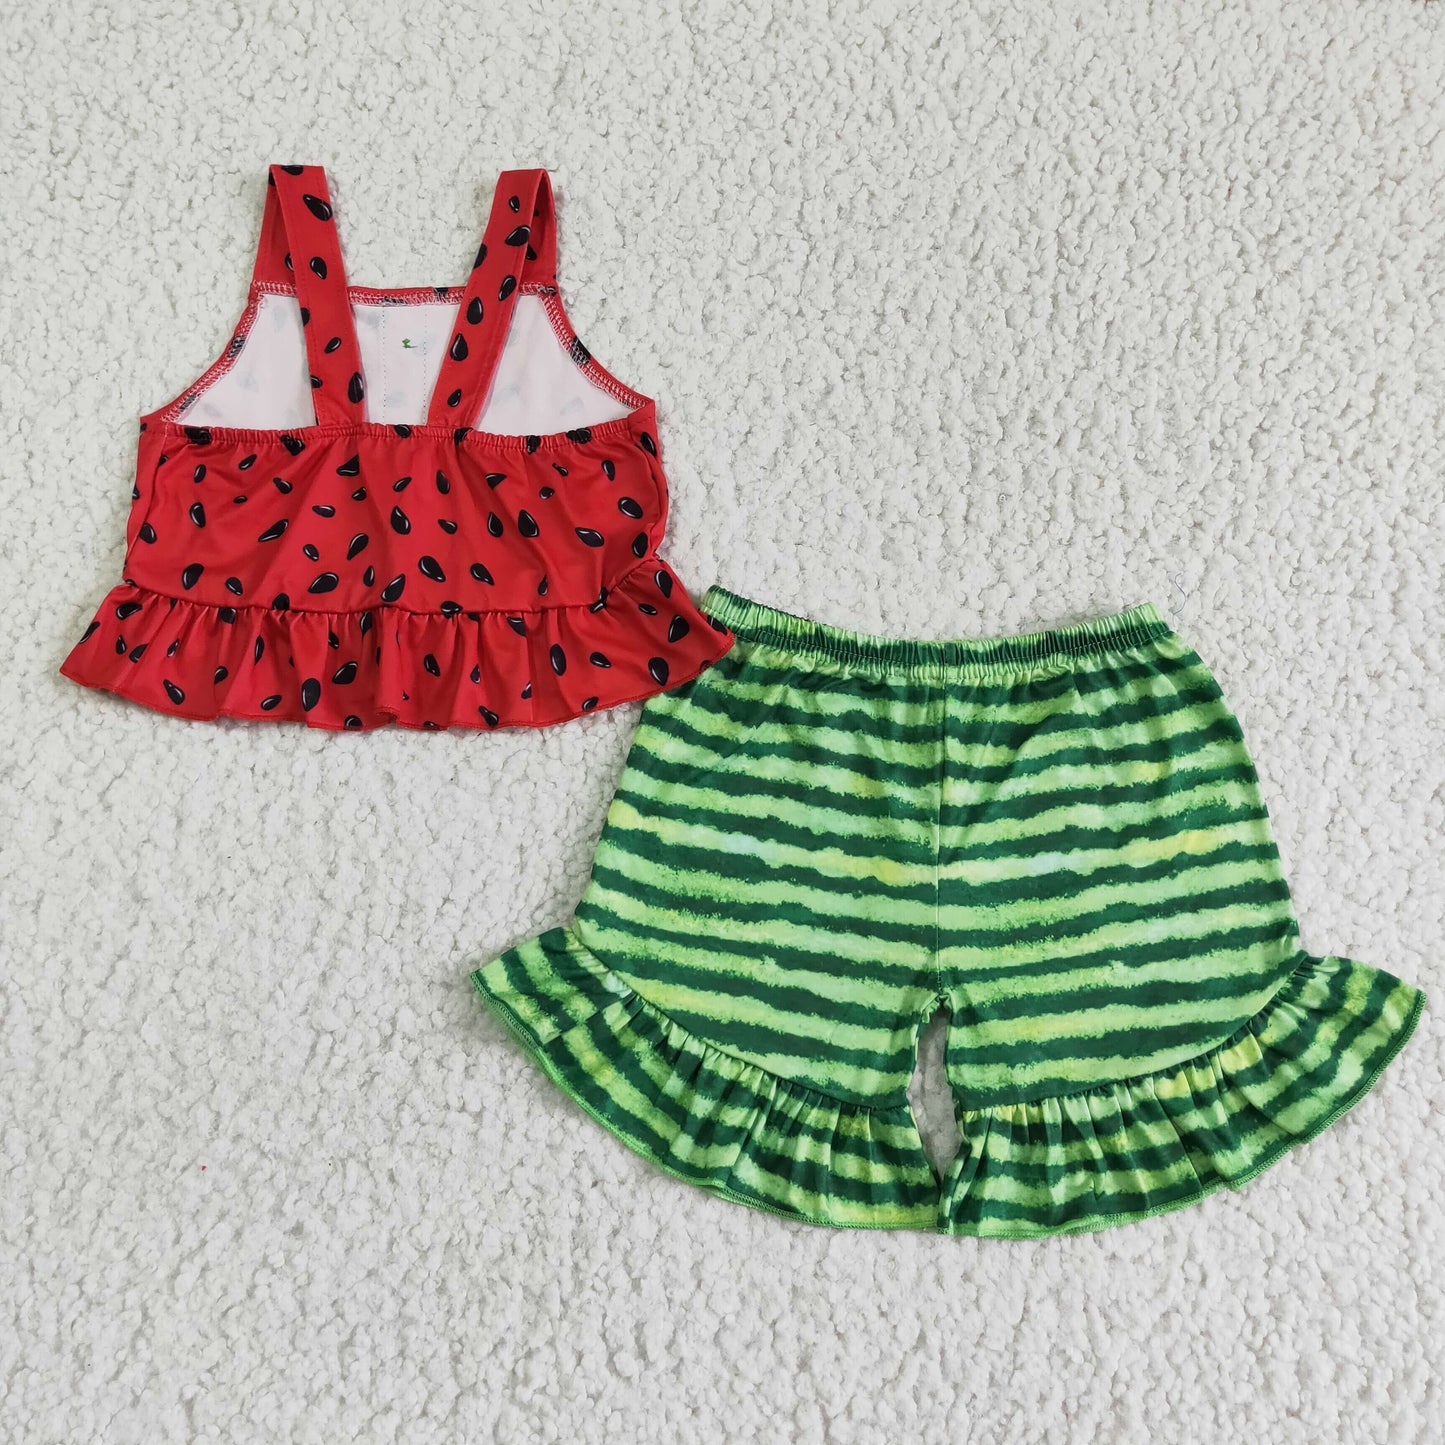 (Promotion)B0-28Sleeveless crop top summer outfits